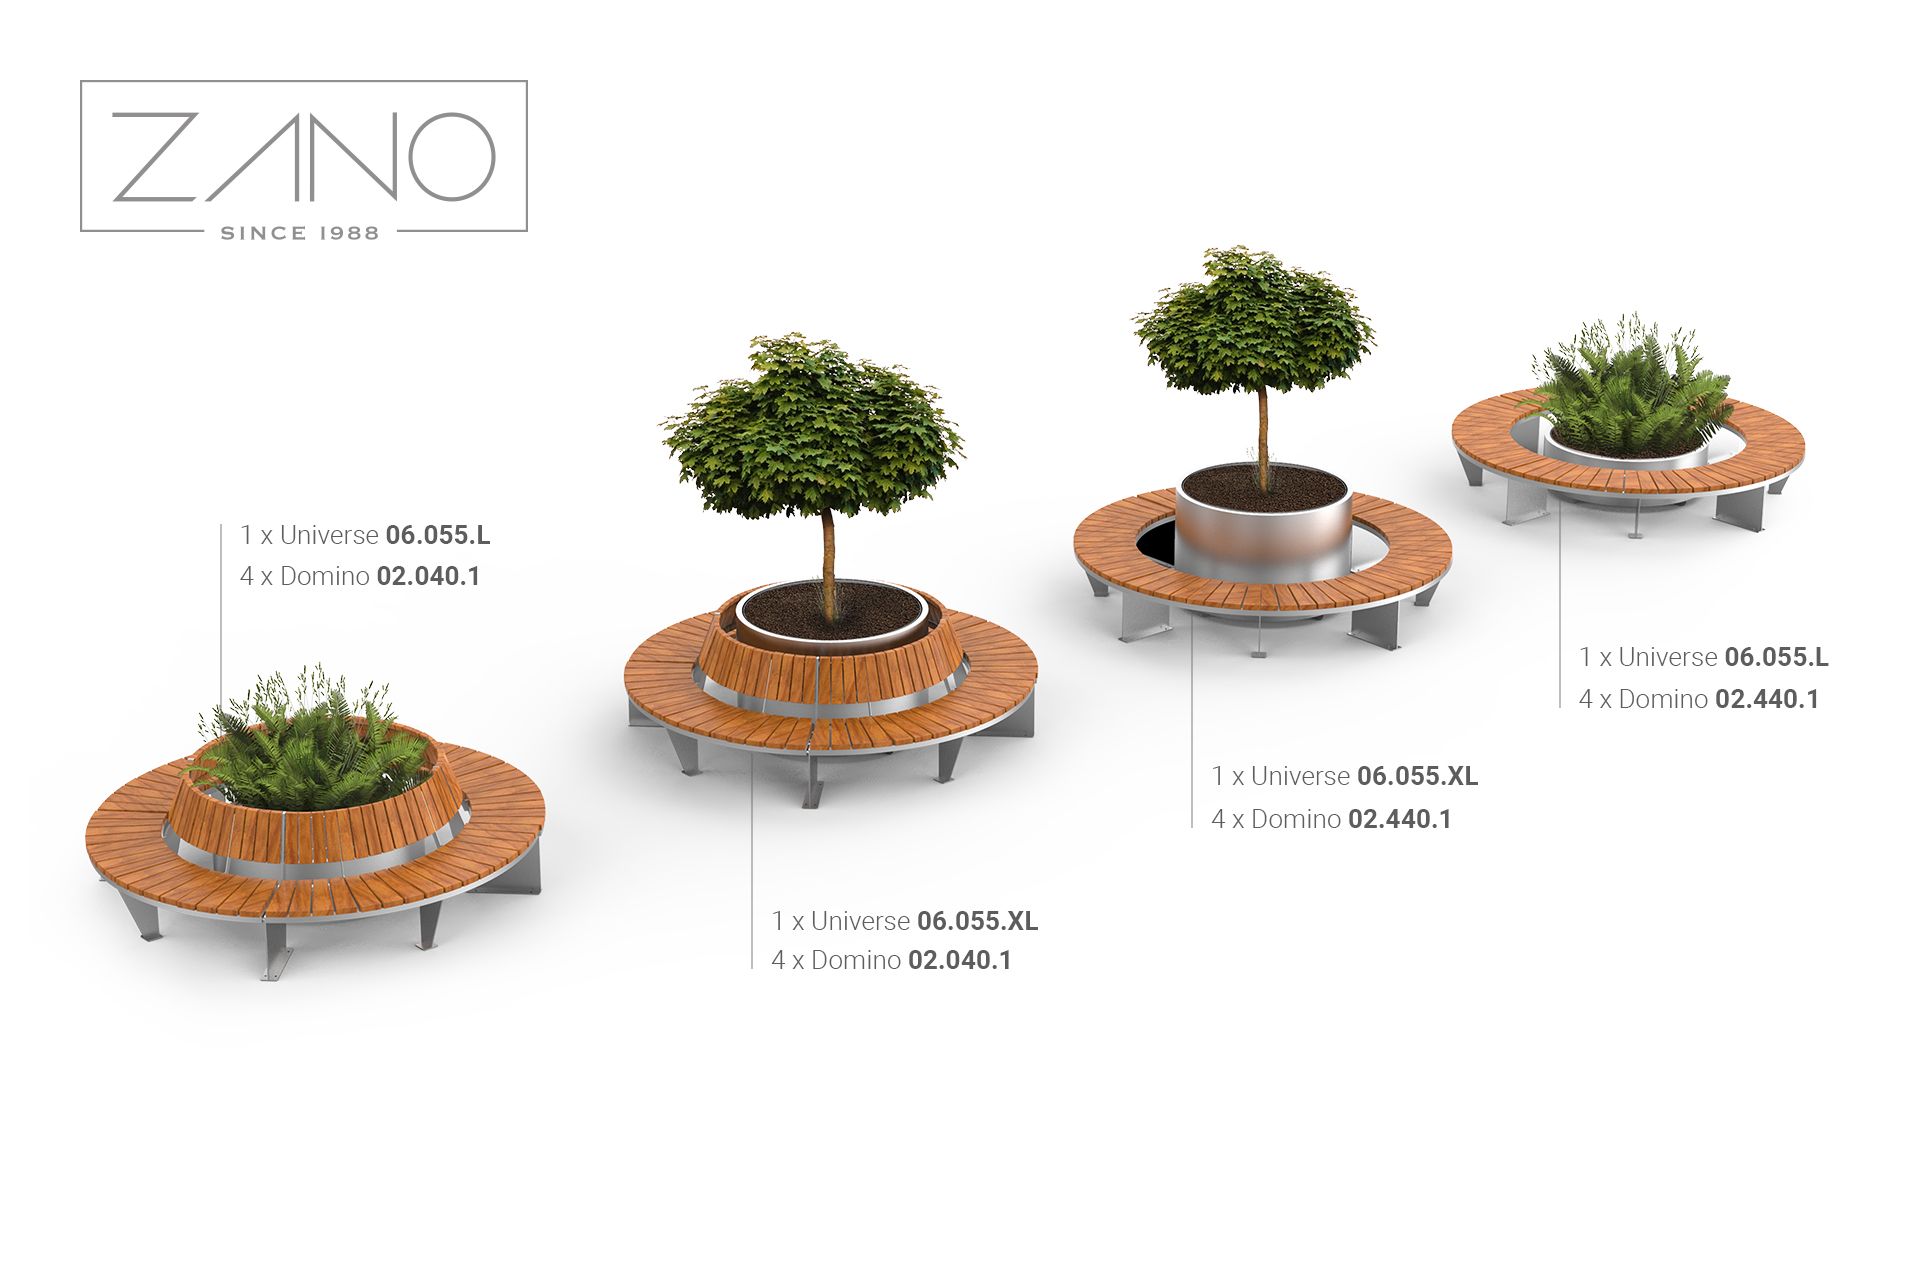 Half-round city benches with planters Domino